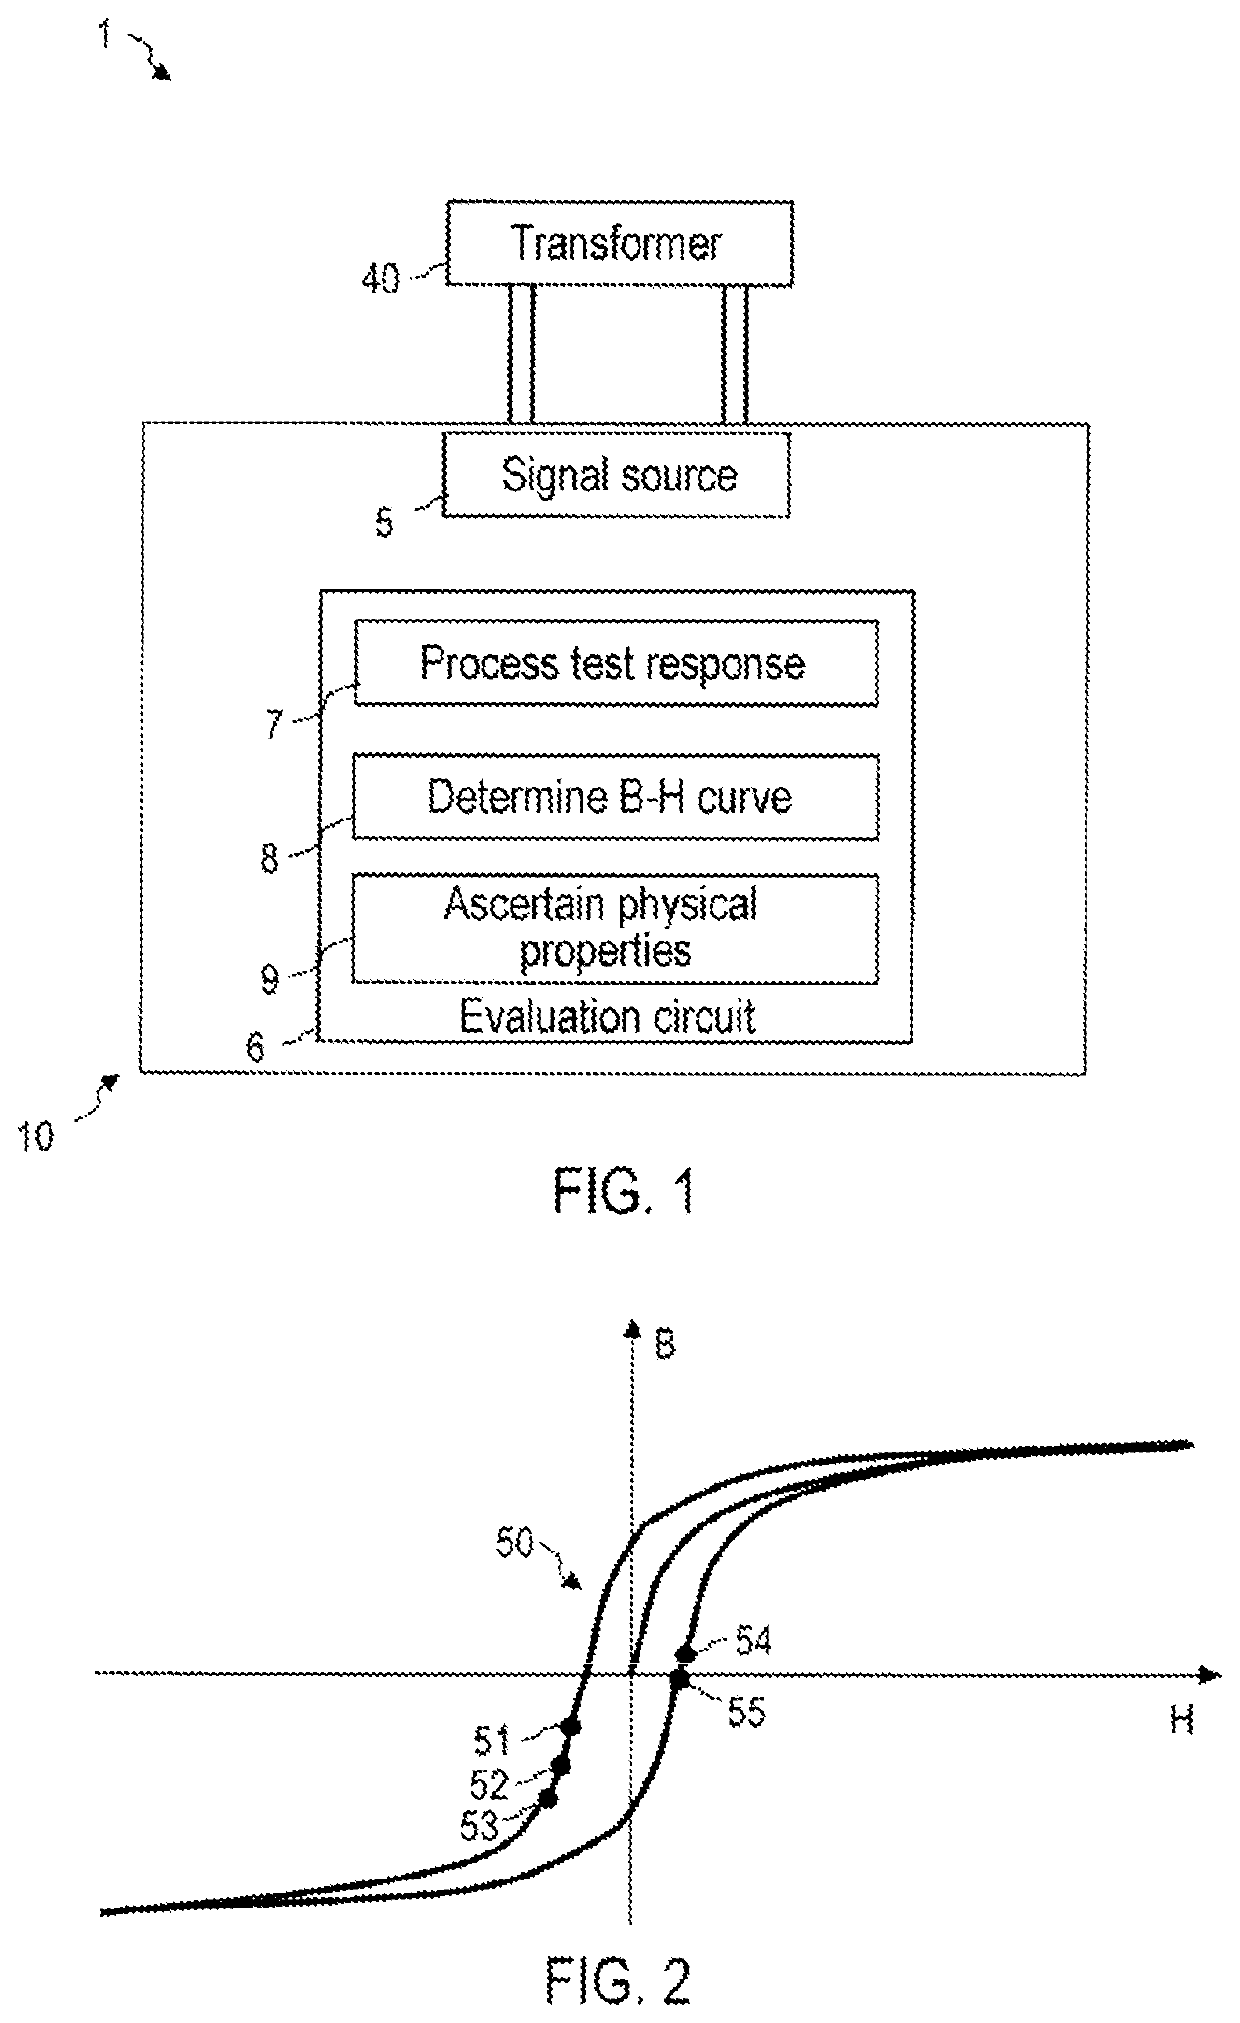 Mobile transformer test device and method for testing a power transformer